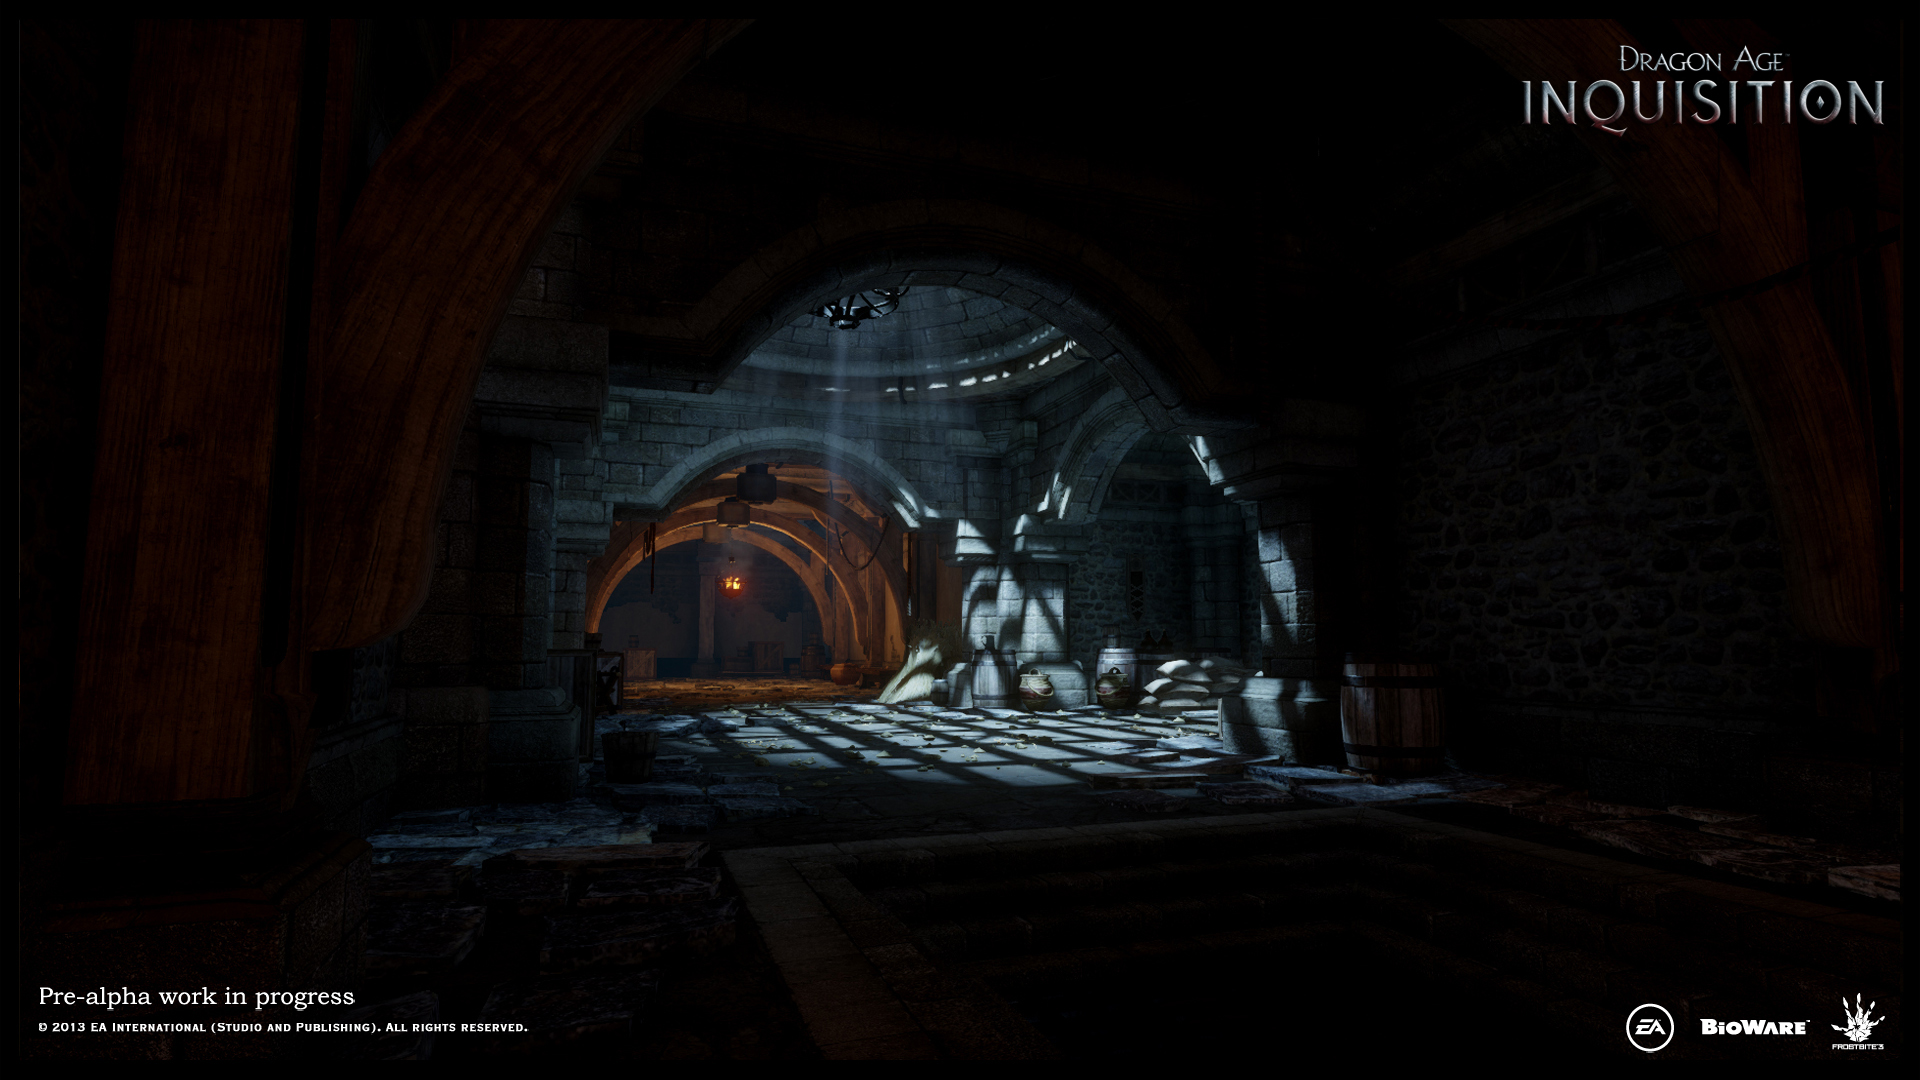 Media asset in full size related to 3dfxzone.it news item entitled as follows: BioWare pubblica nuovi screenshot del game Dragon Age: Inquisition | Image Name: news20523_Dragon-Age-Inquisition-screenshot_5.jpg